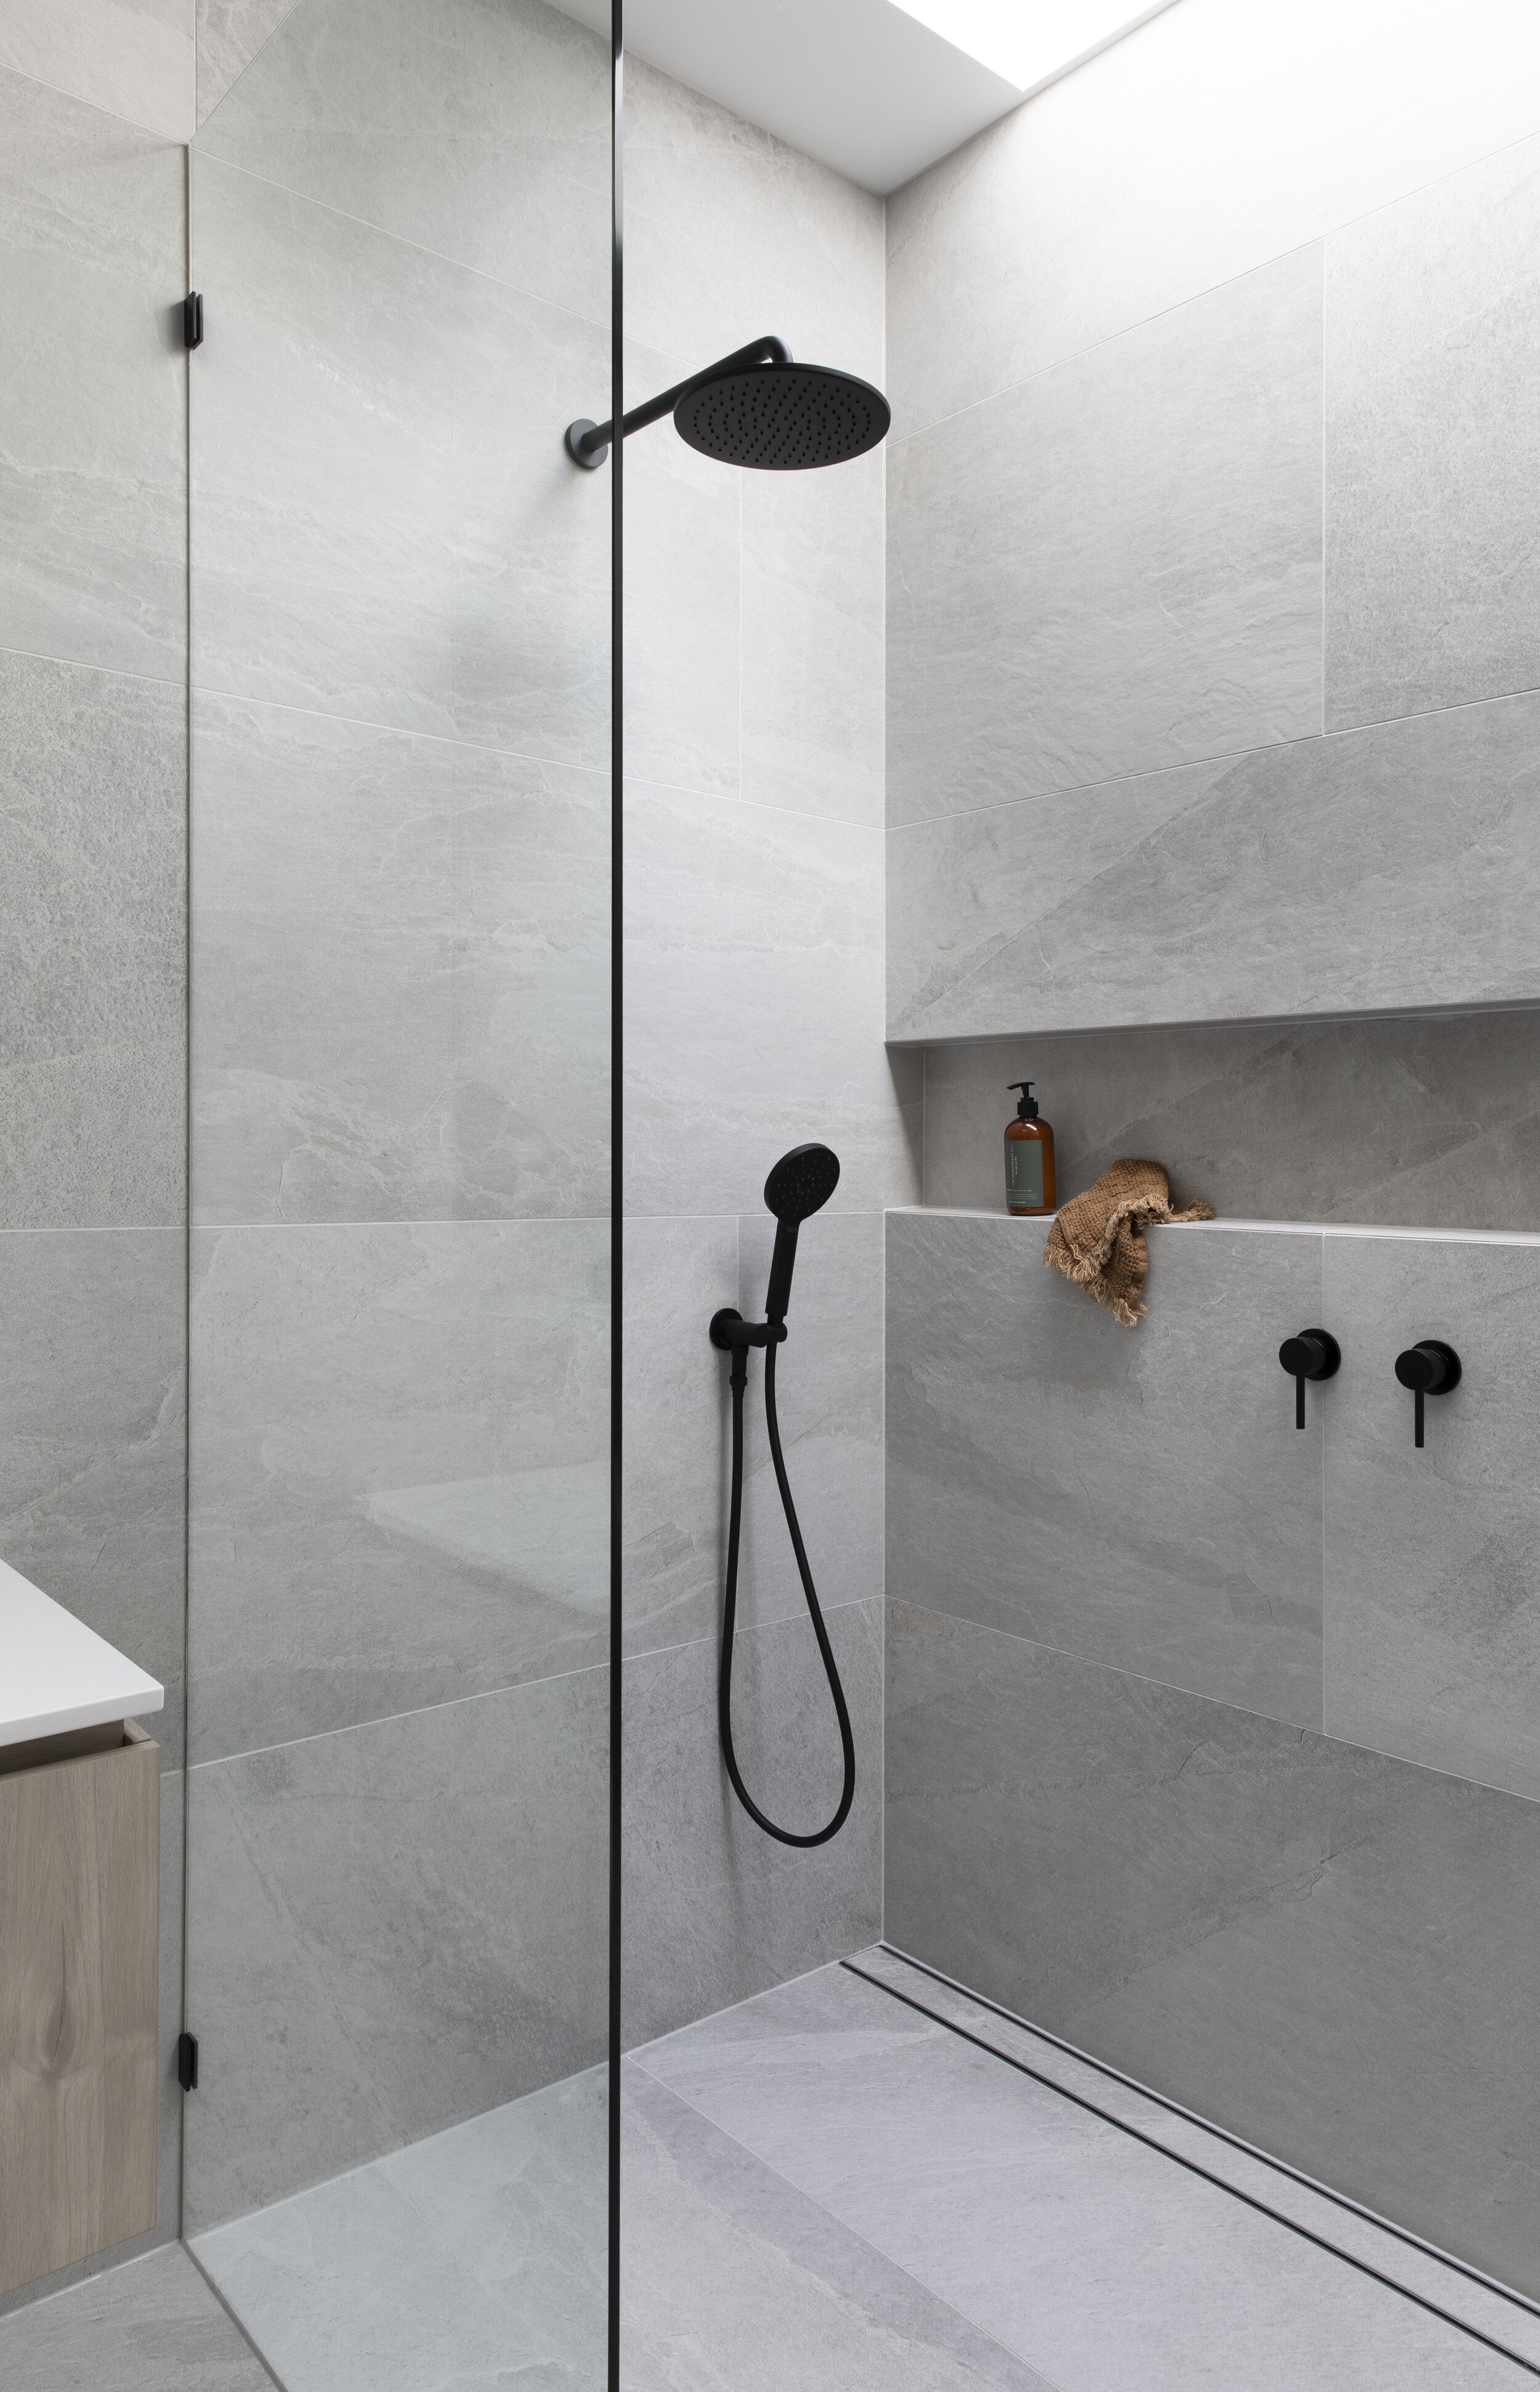 can i use large tiles in a shower? — zephyr + stone